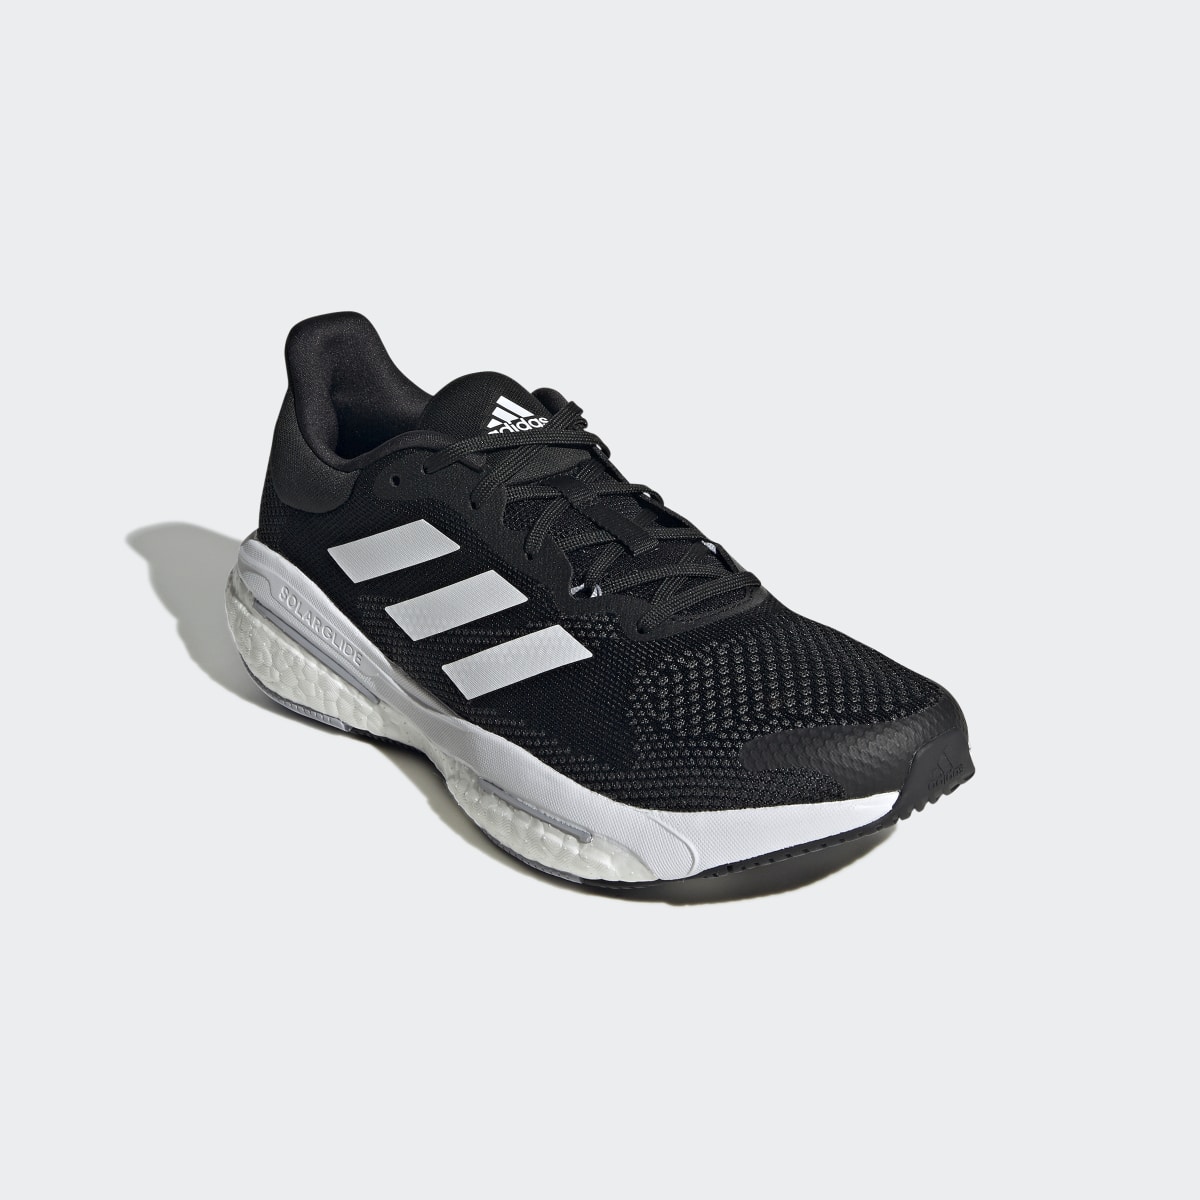 Adidas Solar Glide 5 Shoes Wide. 8